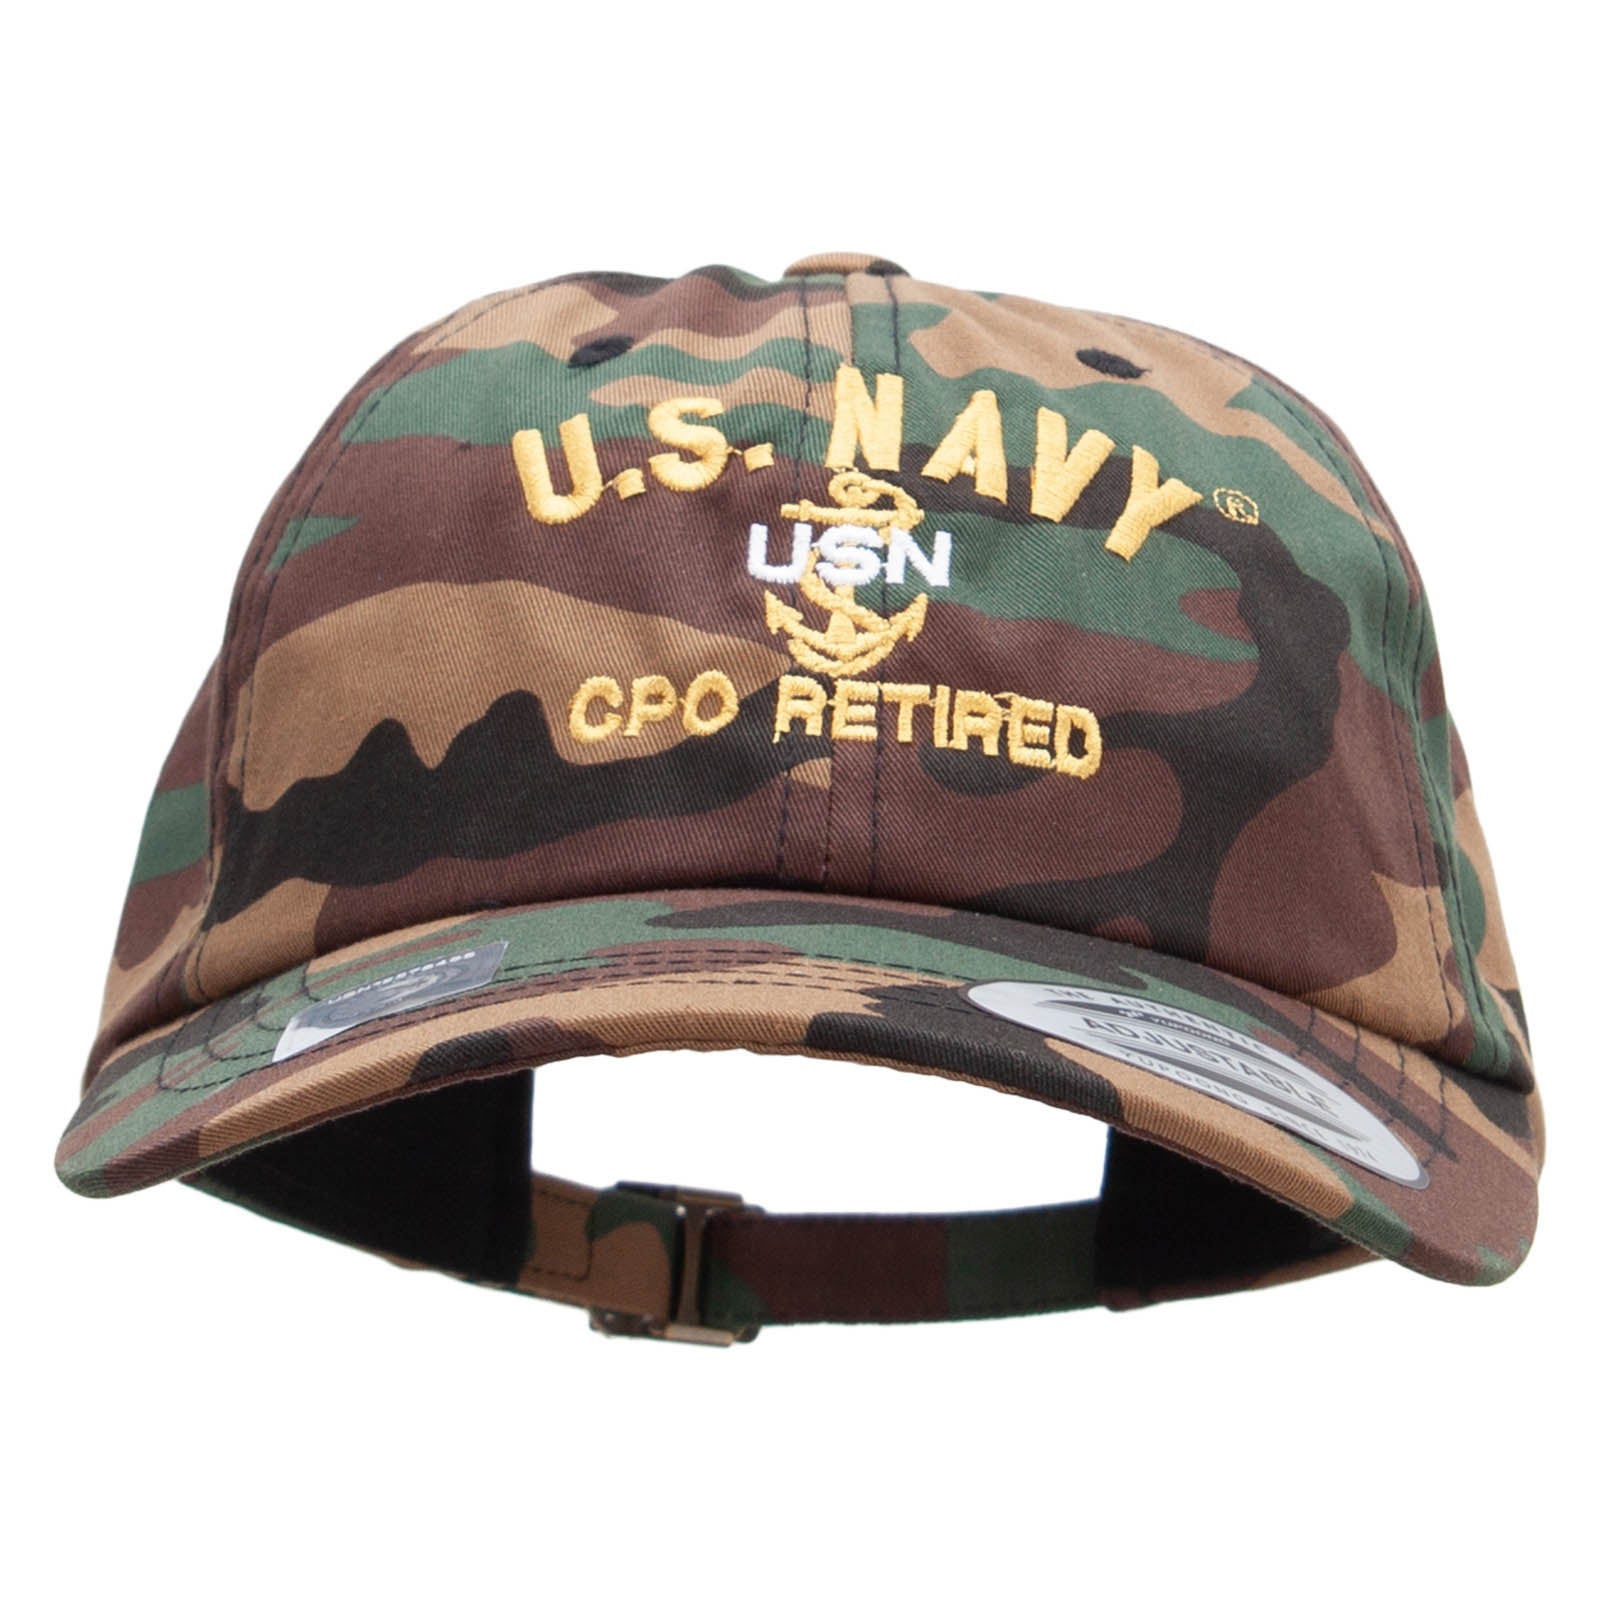 Licensed US Navy USN CPO Retired Unstructured Low Profile 6 panel Cotton Cap - Green Camo OSFM